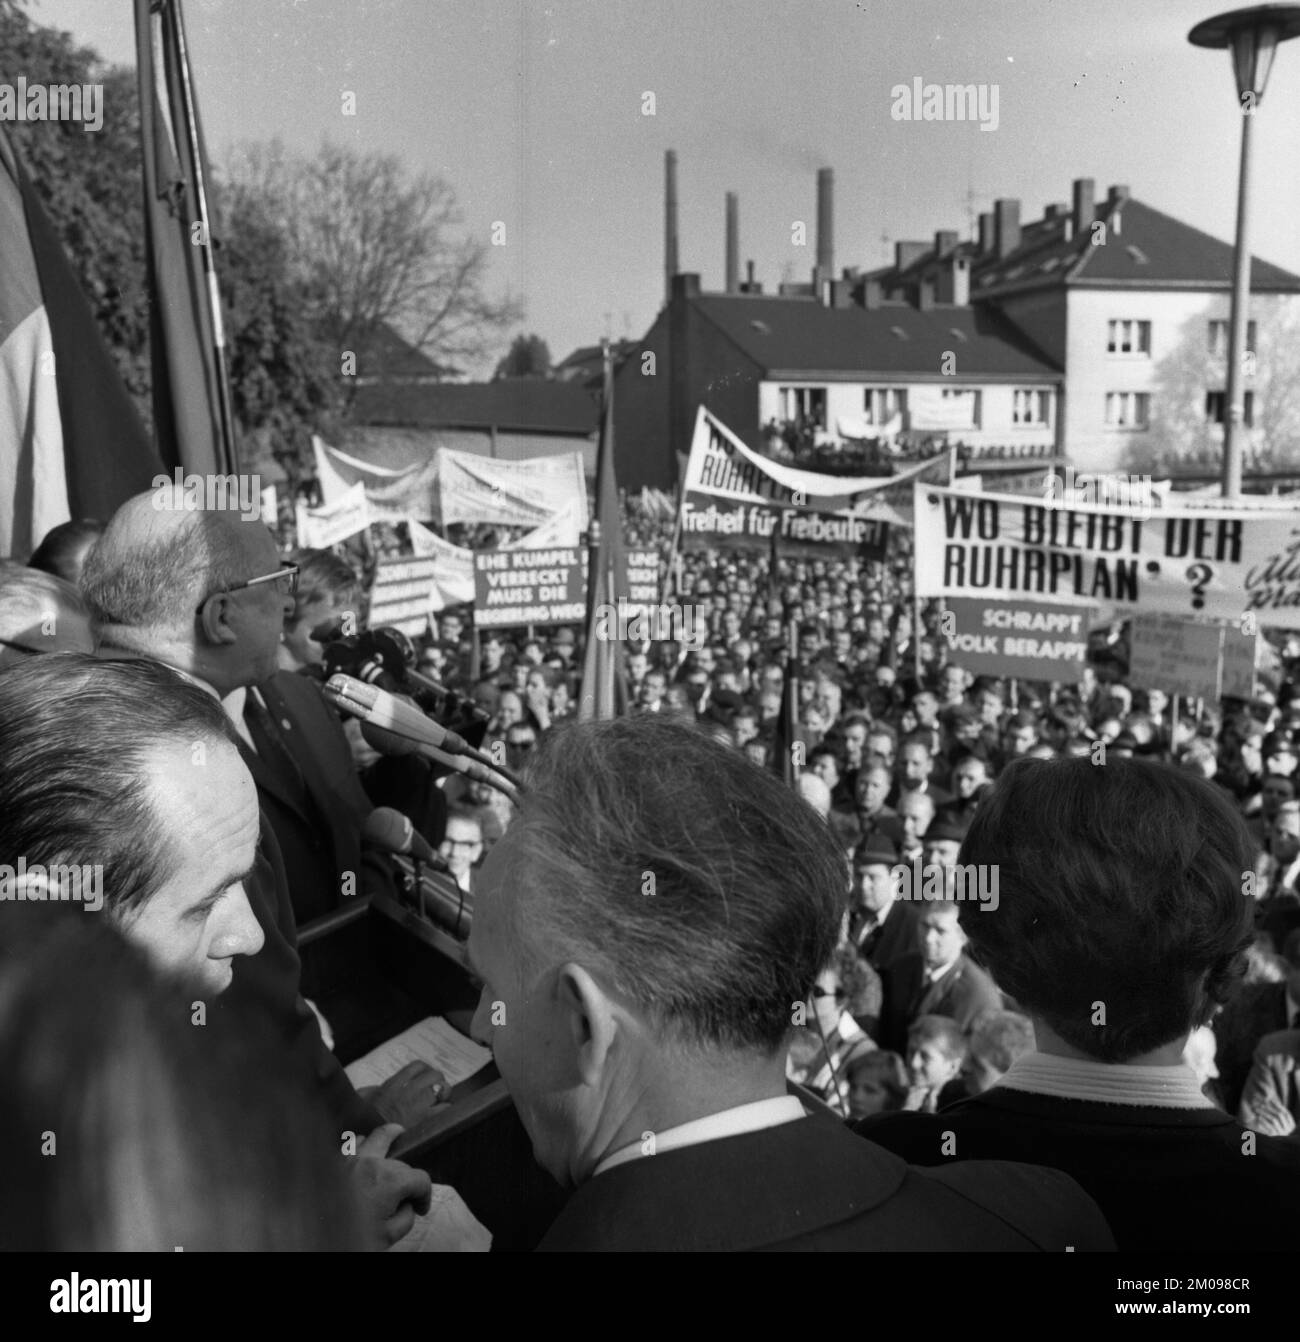 A wave of outrage swept the Ruhr area when the Hansa mine was closed, here during demonstrations in Dortmund-Huckarde, Germany, on 21 October 1967, Eu Stock Photo